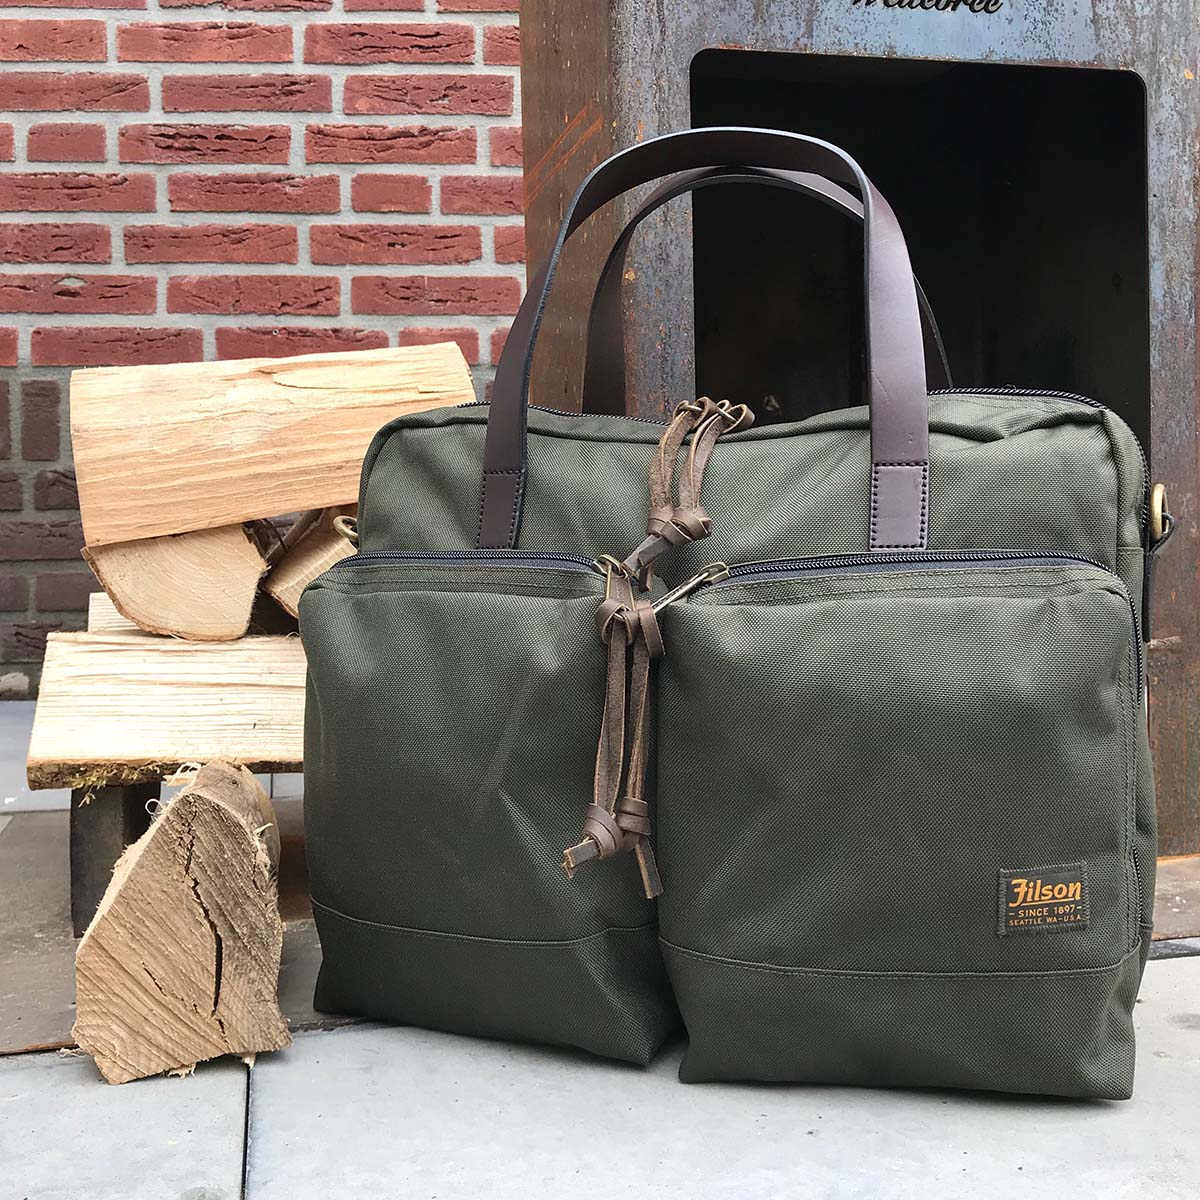 Filson Ballistic Nylon Dryden Briefcase Otter Green, made of abrasion-resistant ballistic nylon that holds up to heavy use